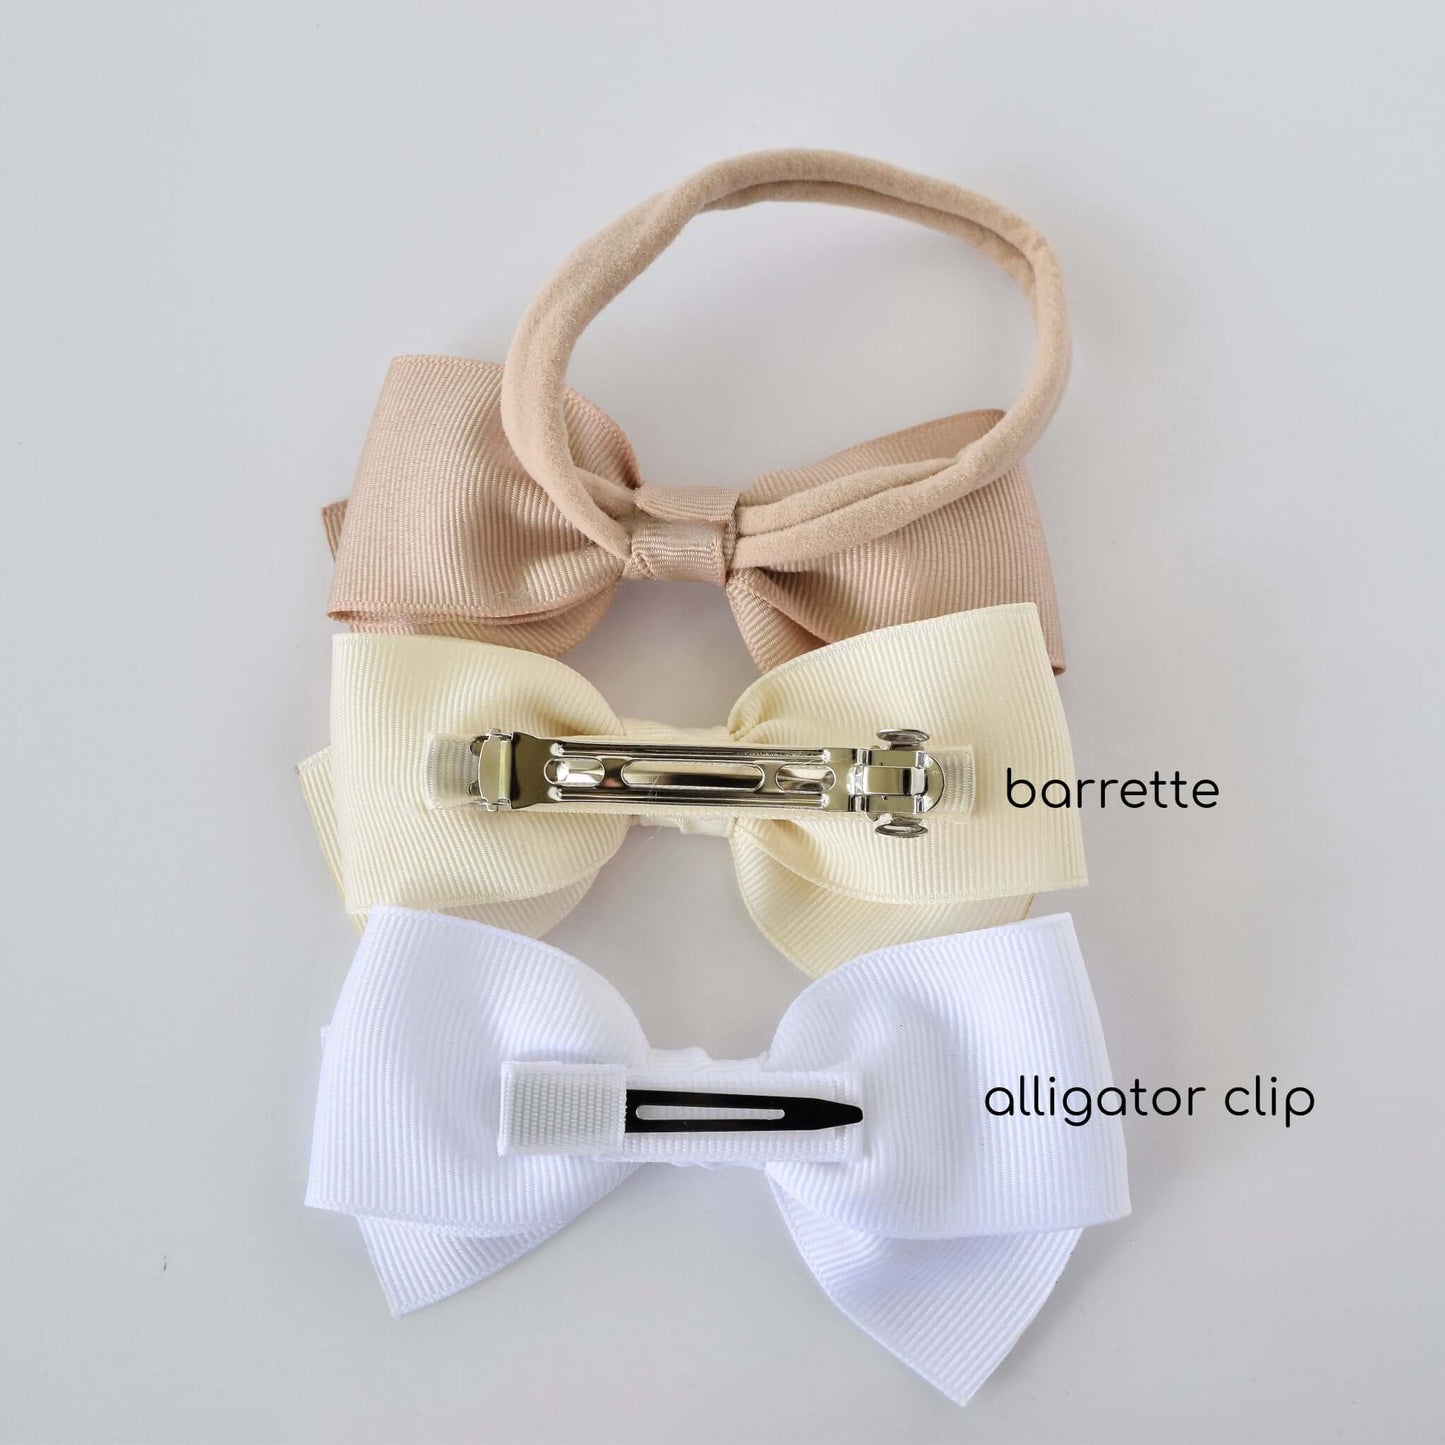 Grosgrain baby Kayla bow clip and headband with alligator clip and barrette options for toddlers and newborns in pastel colors.